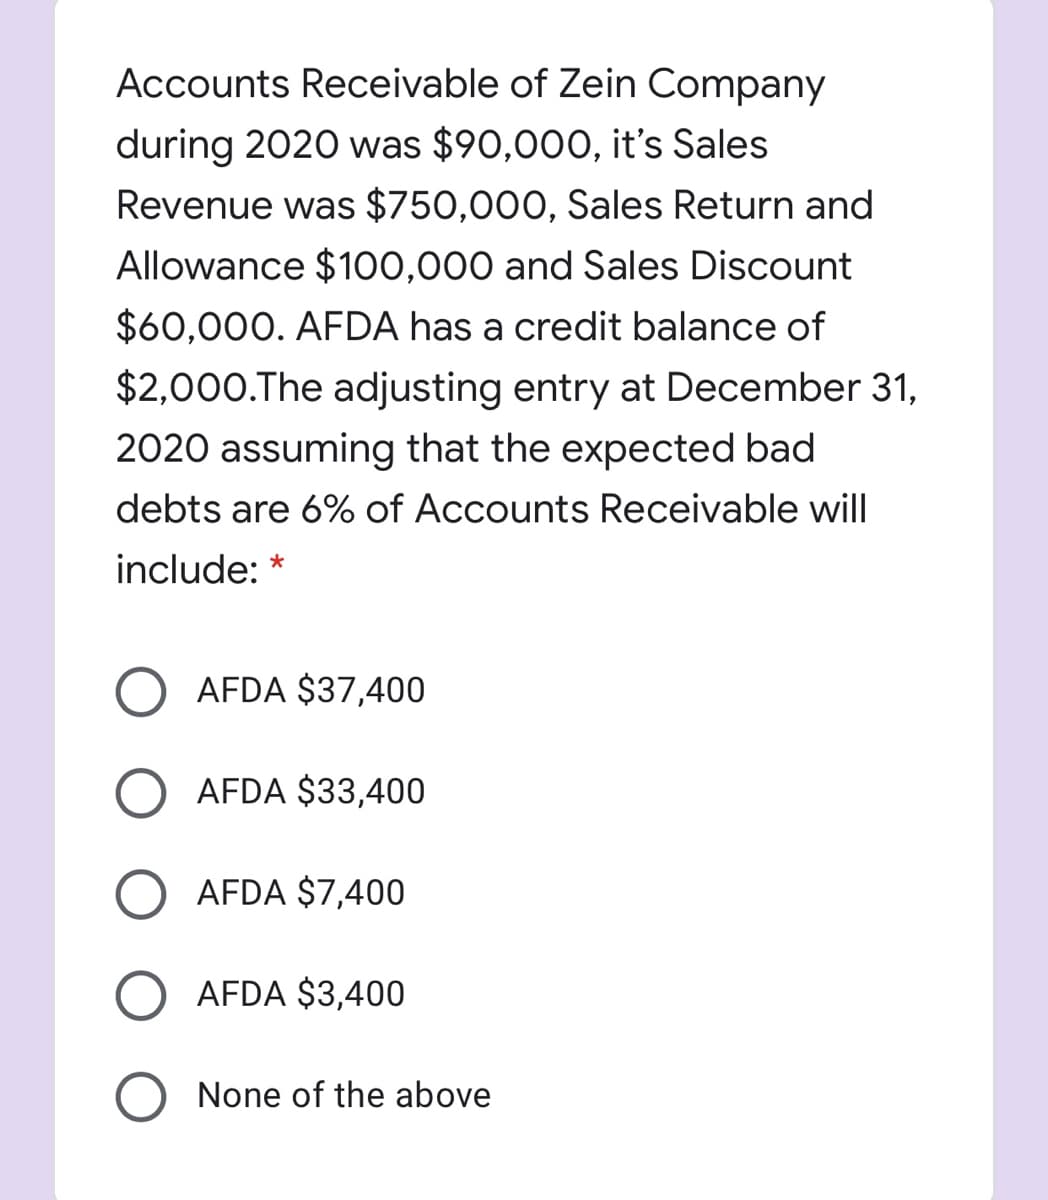 Accounts Receivable of Zein Company
during 2020 was $90,000, it's Sales
Revenue was $750,000, Sales Return and
Allowance $100,000 and Sales Discount
$60,000. AFDA has a credit balance of
$2,000.The adjusting entry at December 31,
2020 assuming that the expected bad
debts are 6% of Accounts Receivable will
include: *
AFDA $37,400
O AFDA $33,400
AFDA $7,400
AFDA $3,400
None of the above
